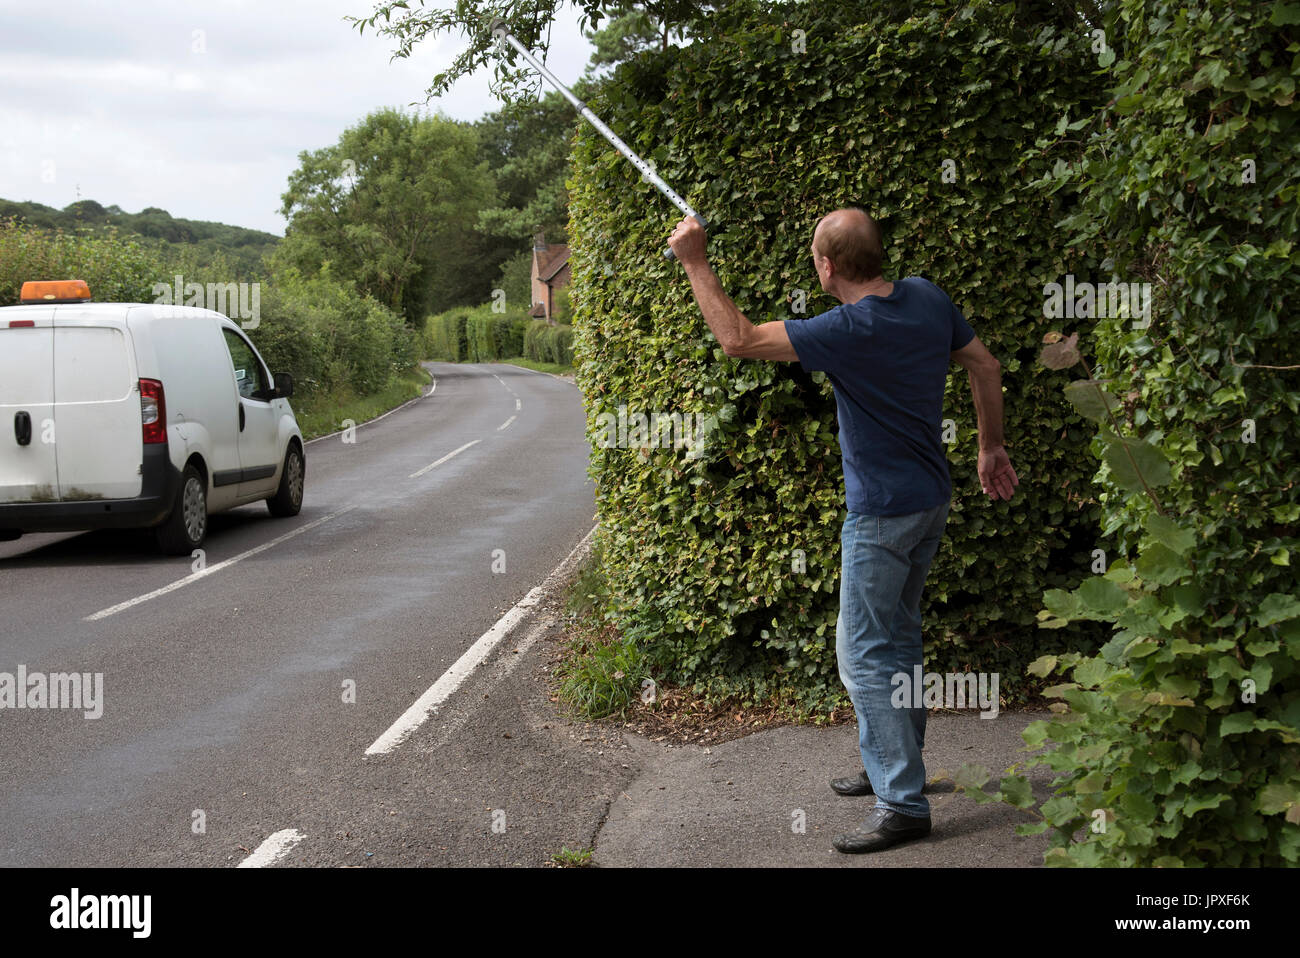 Angry elderly man trying to cross a road waving his walking stick at a passing motorist driving a white van Stock Photo